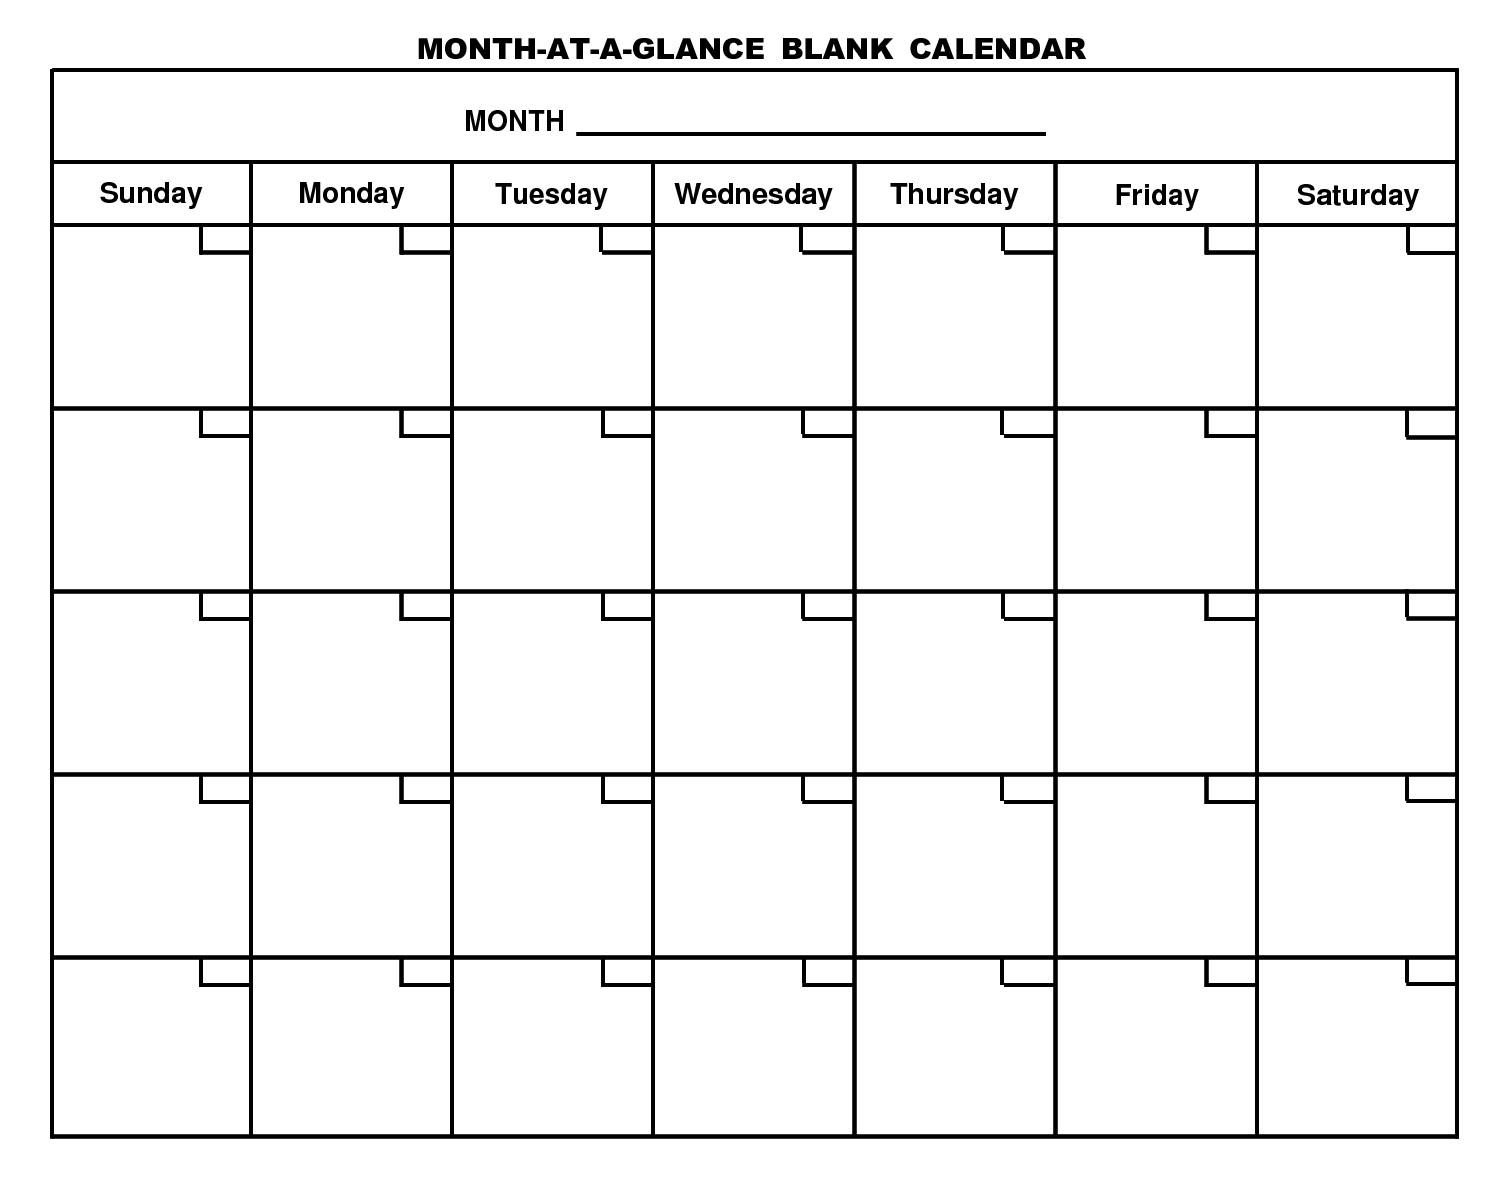 Free Printable Monthly Calendar With Large Boxes Skymaps Exceptional Month At A Glance Blank Calendar